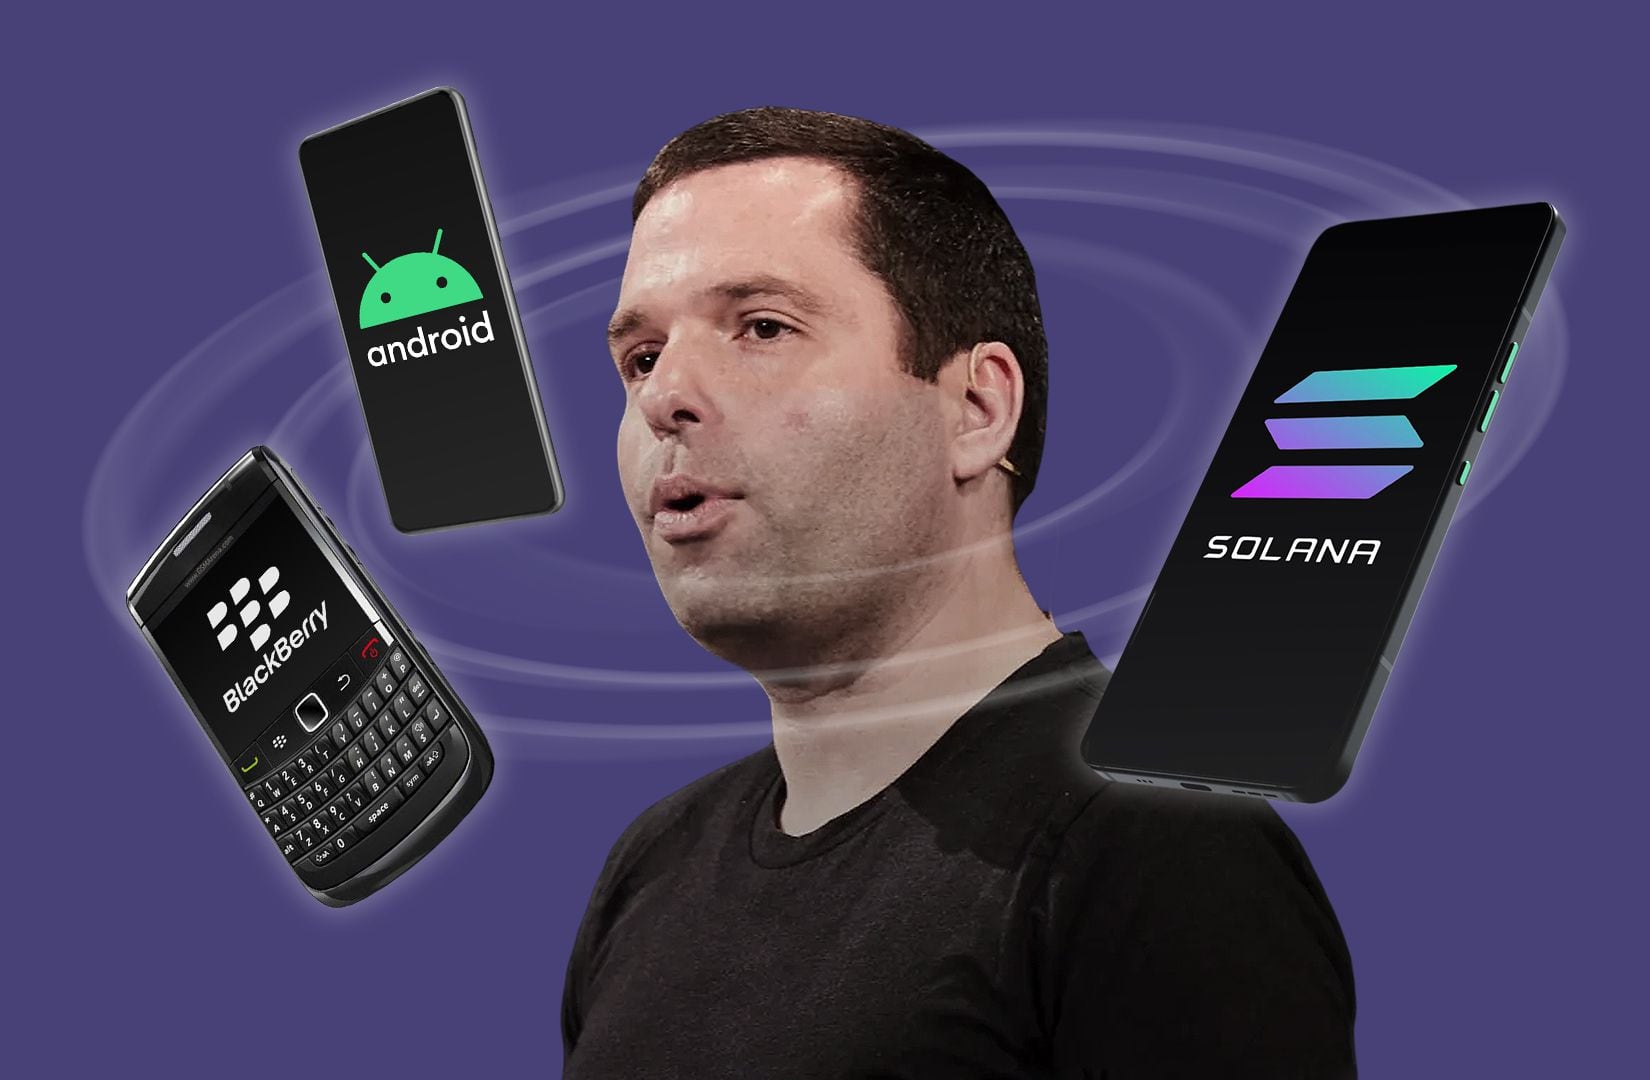 Solana dev says new crypto phone ‘feels like madness’ — but it already has $65m in pre-orders